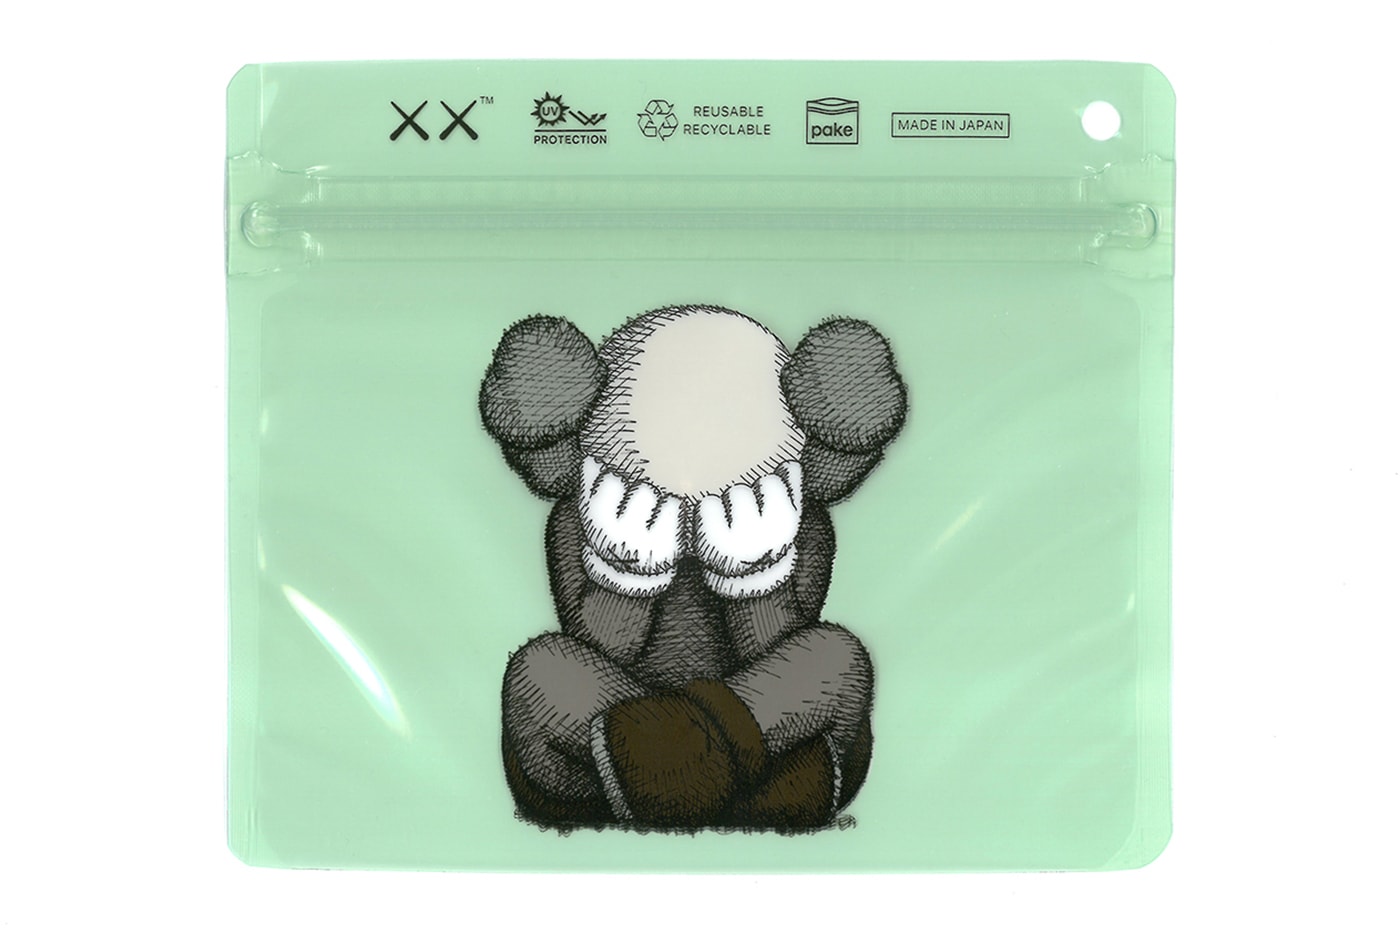 KAWS Pake Collaboration Functional Zip Bags kaws tokyo first multipurpose UV water dust scent proof release